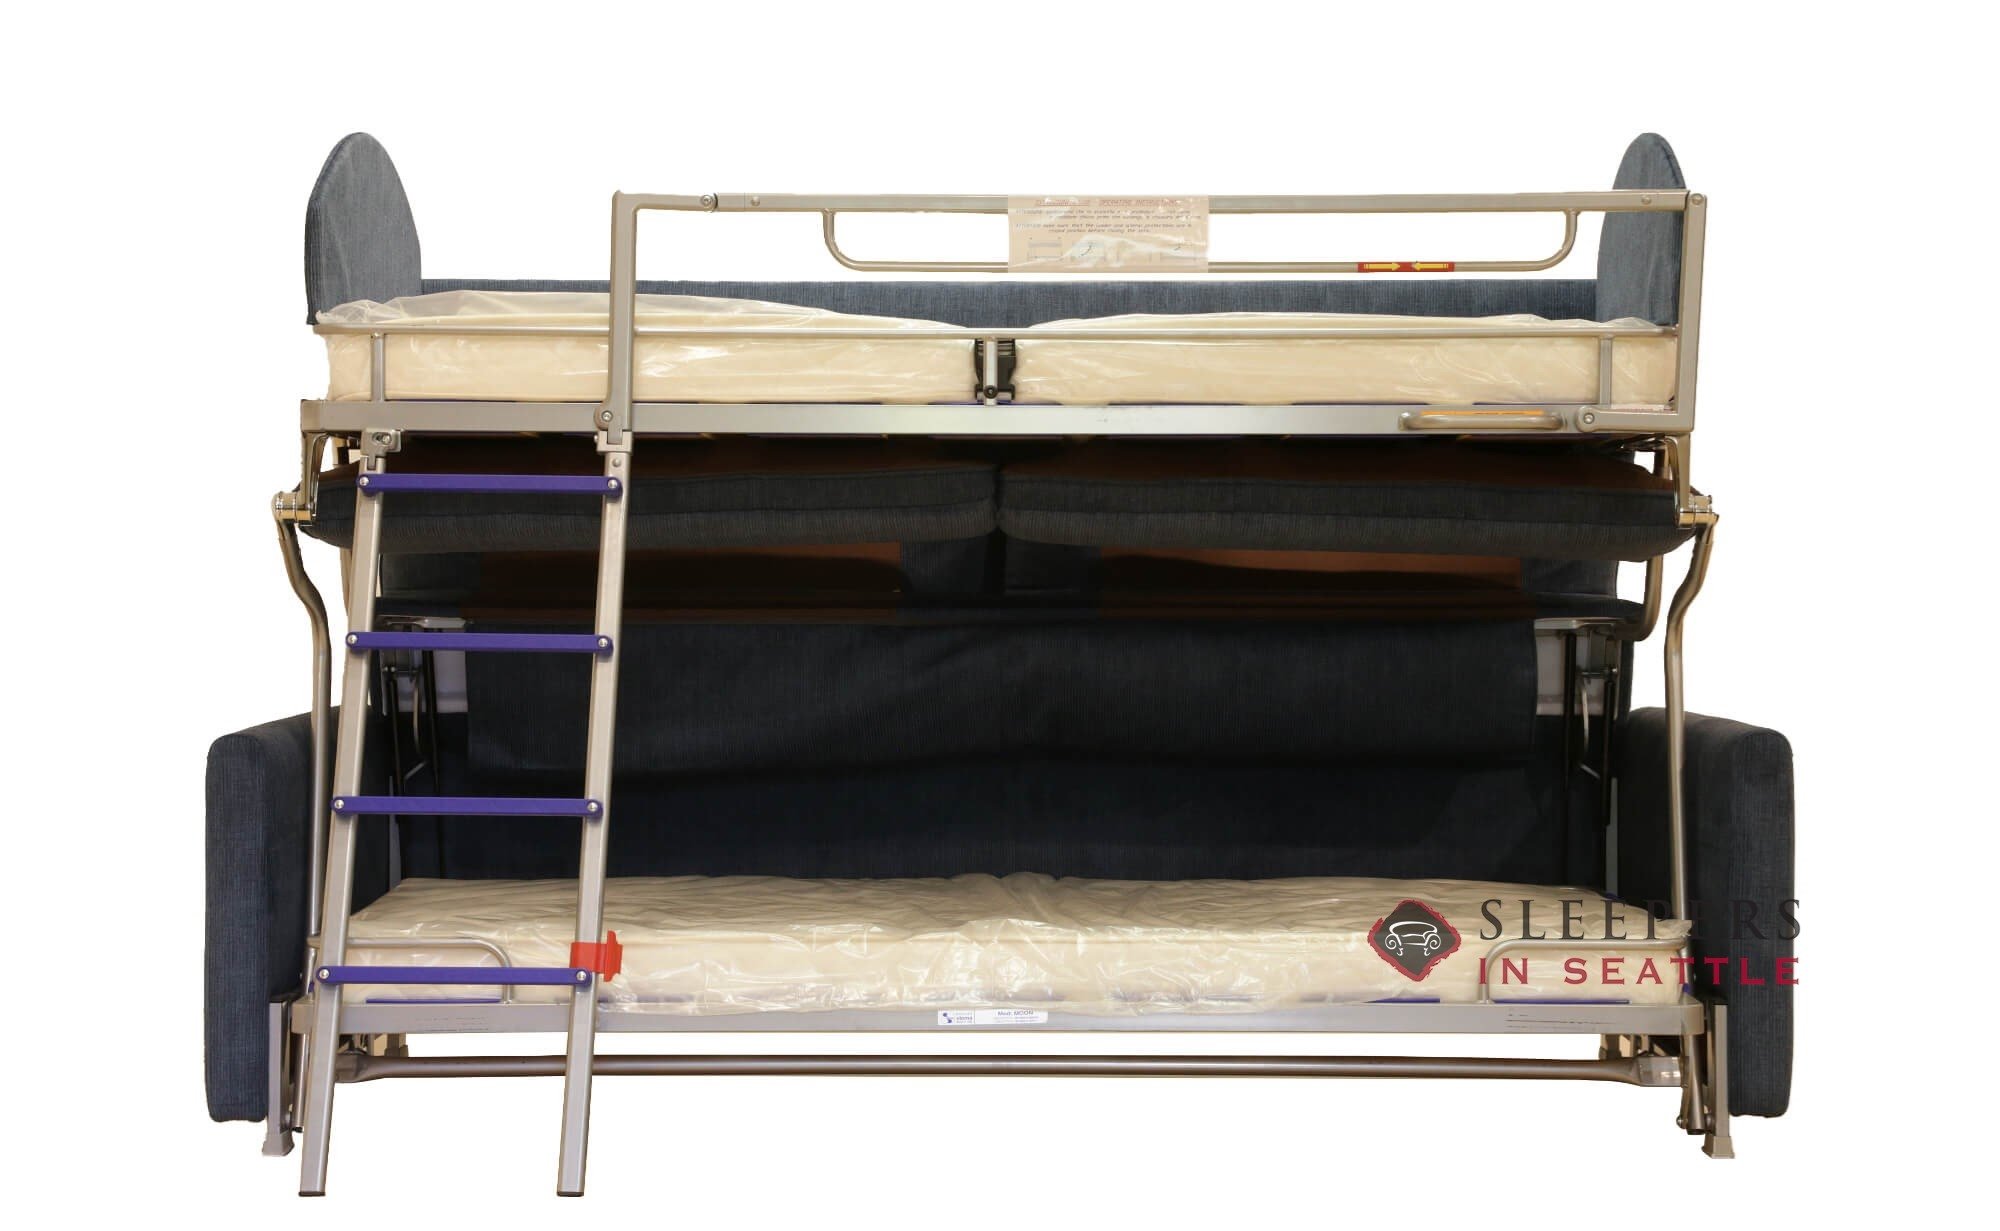 Luonto Elevate Bunk Bed Sleeper Sofa In, A Sofa That Turns Into A Bunk Bed